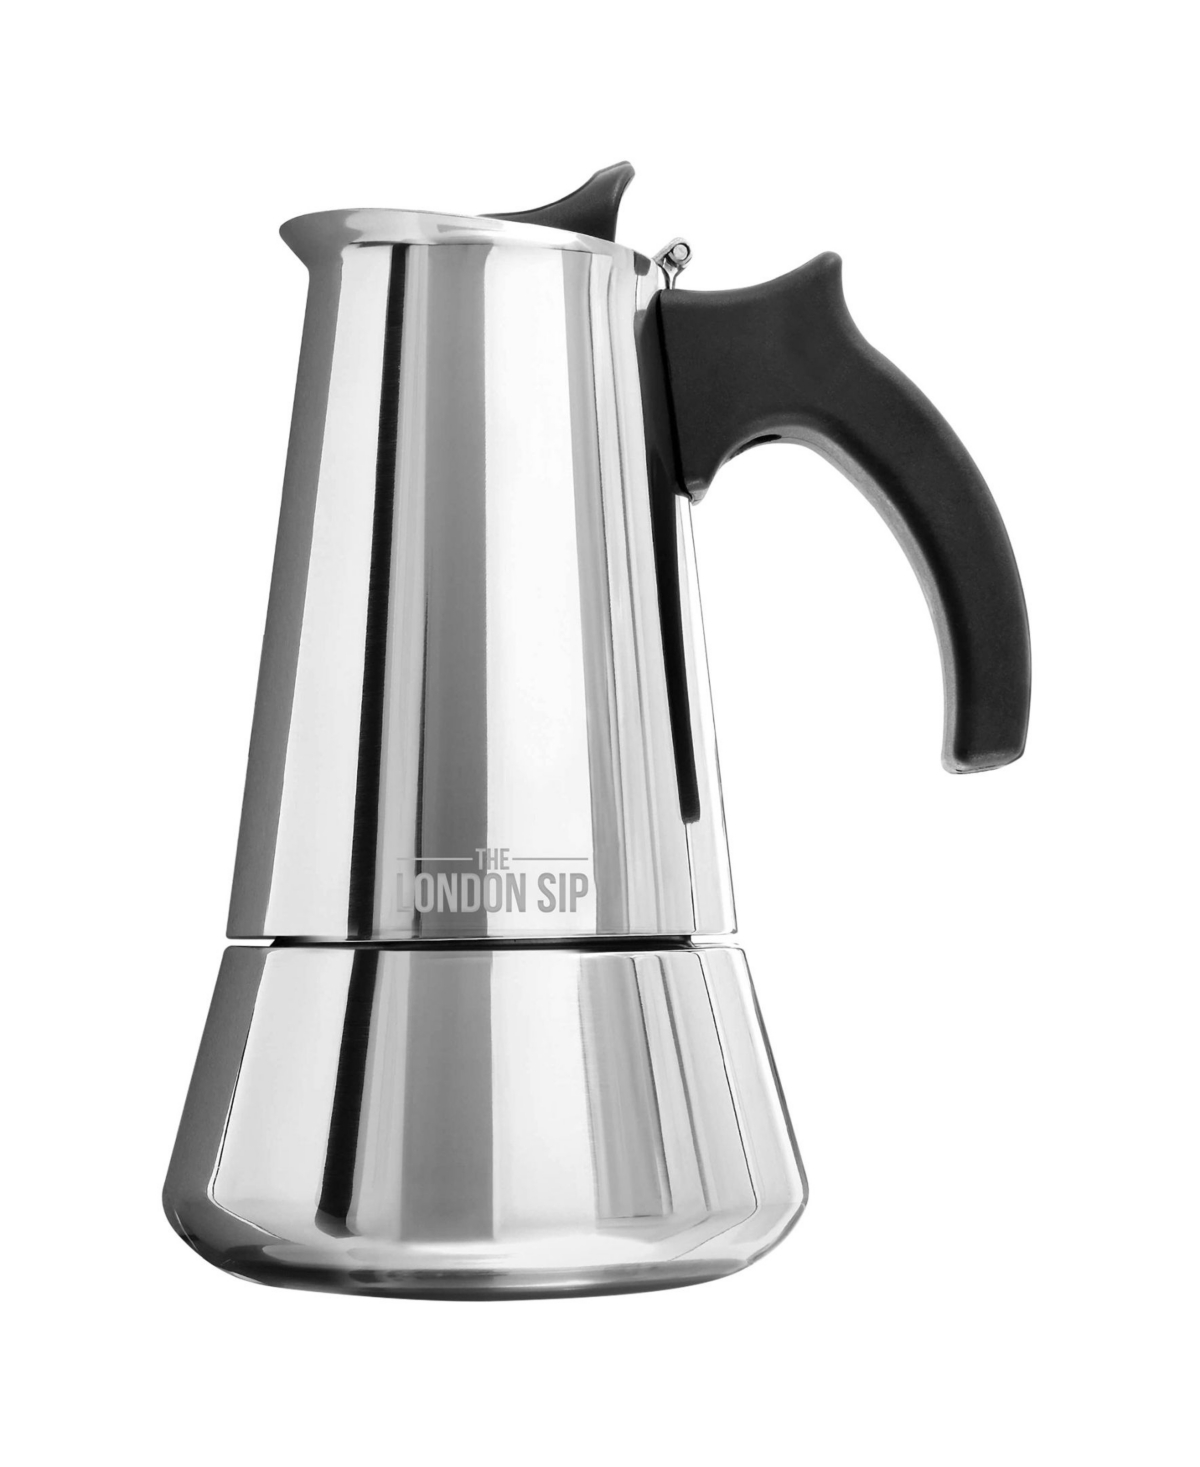 London Sip Stainless Steel Coffee Maker 10-cup In Silver